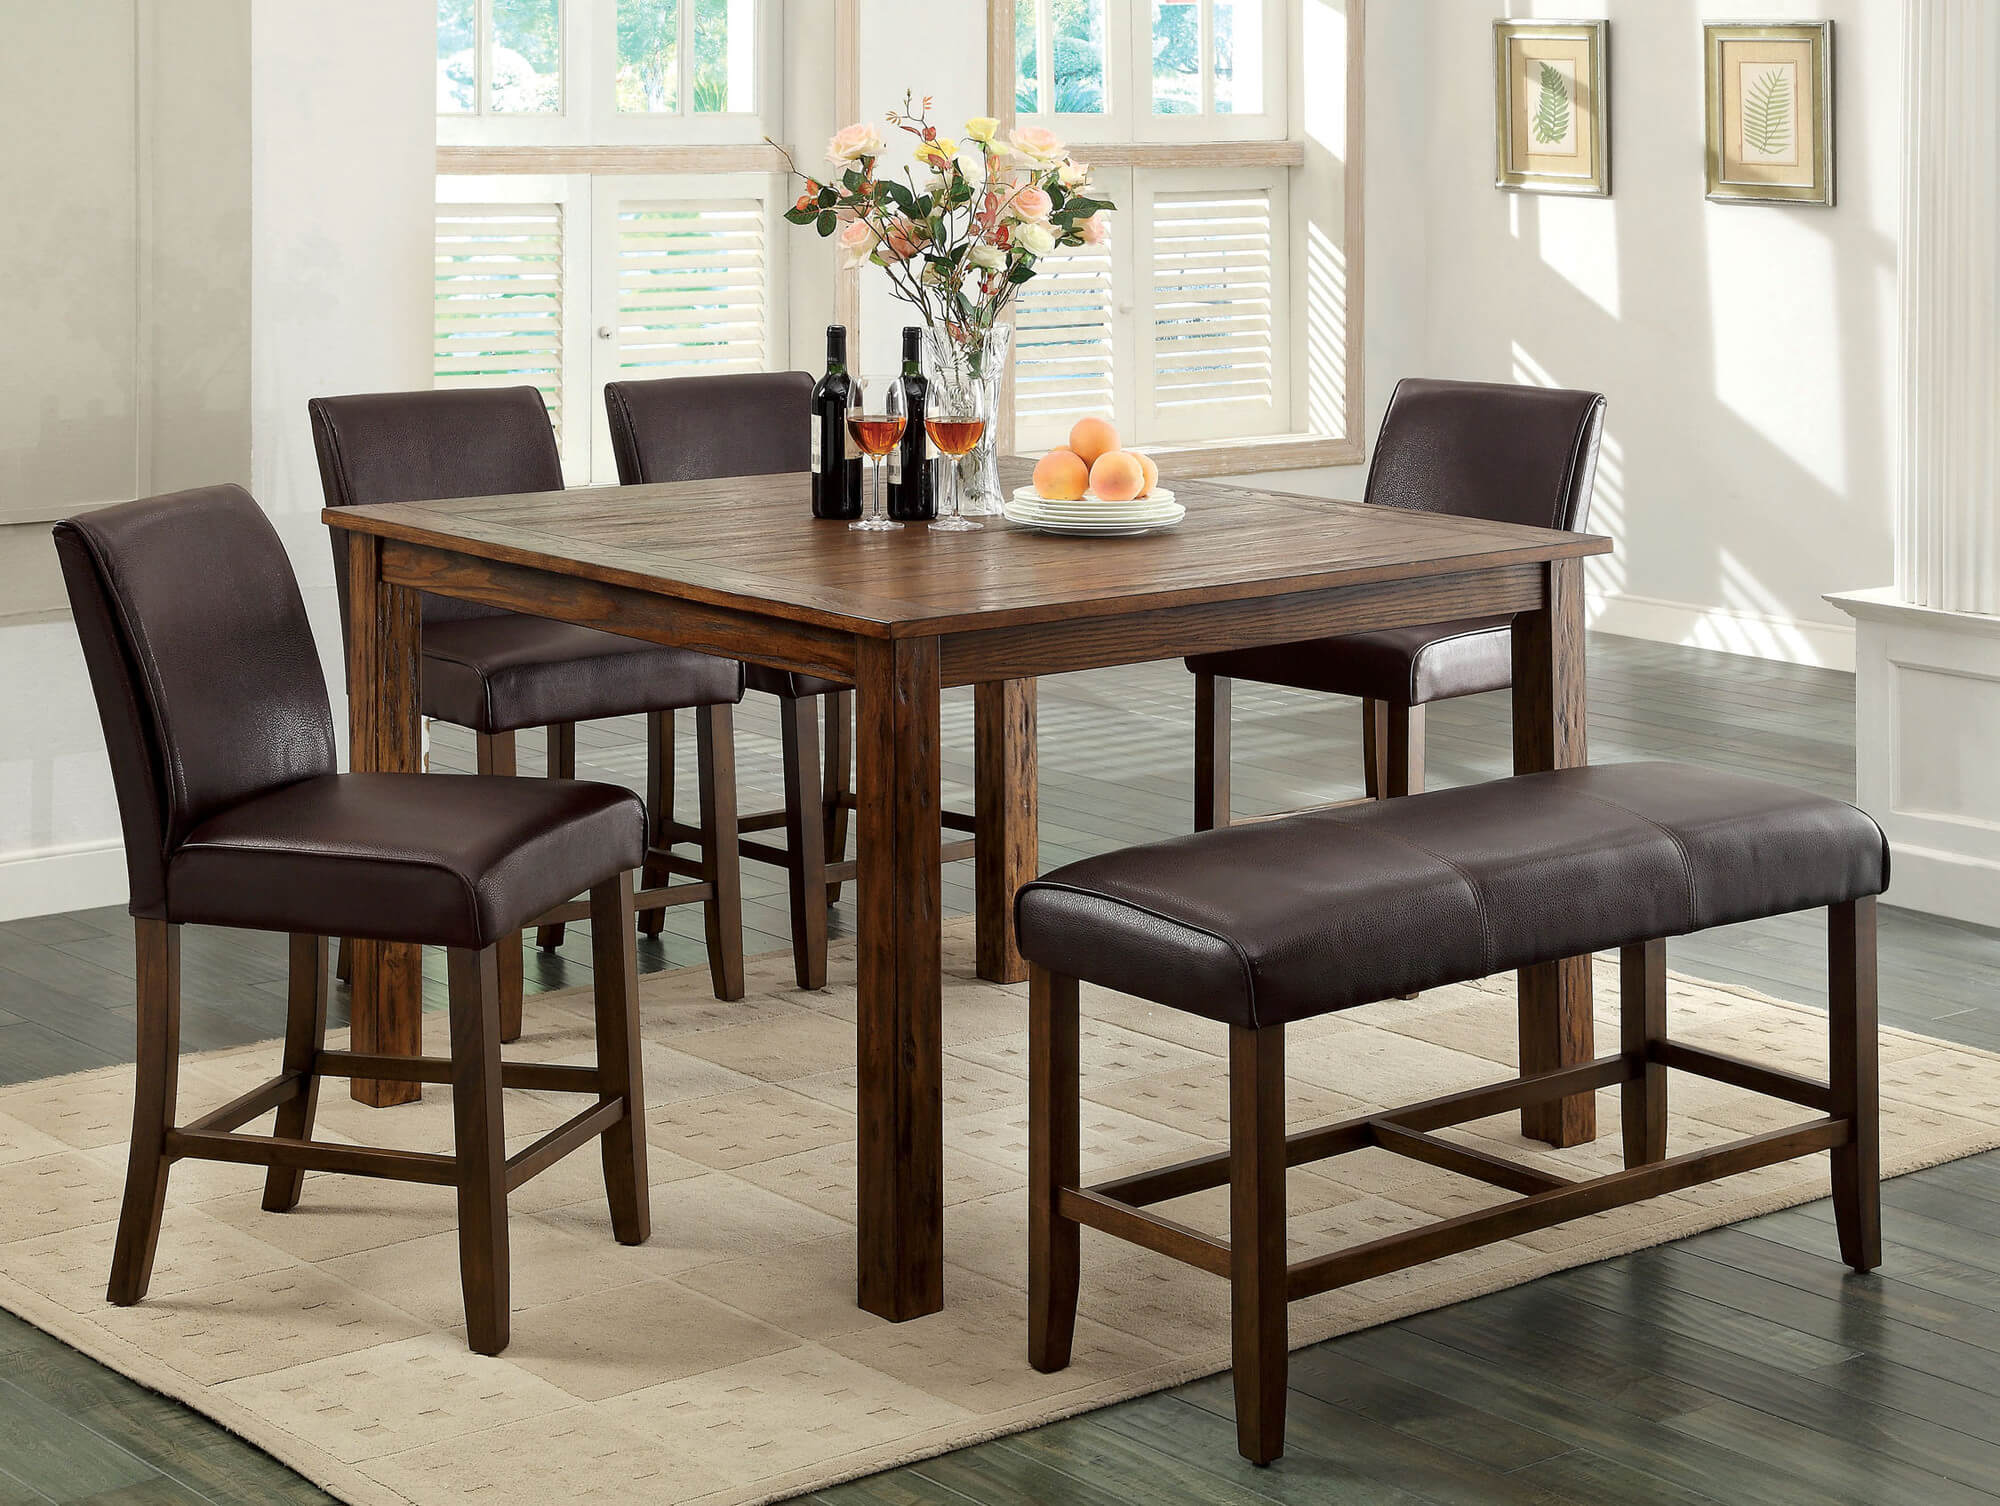 Counter height rustic dining room set with bench. Wood is dark oak finish;  constructed